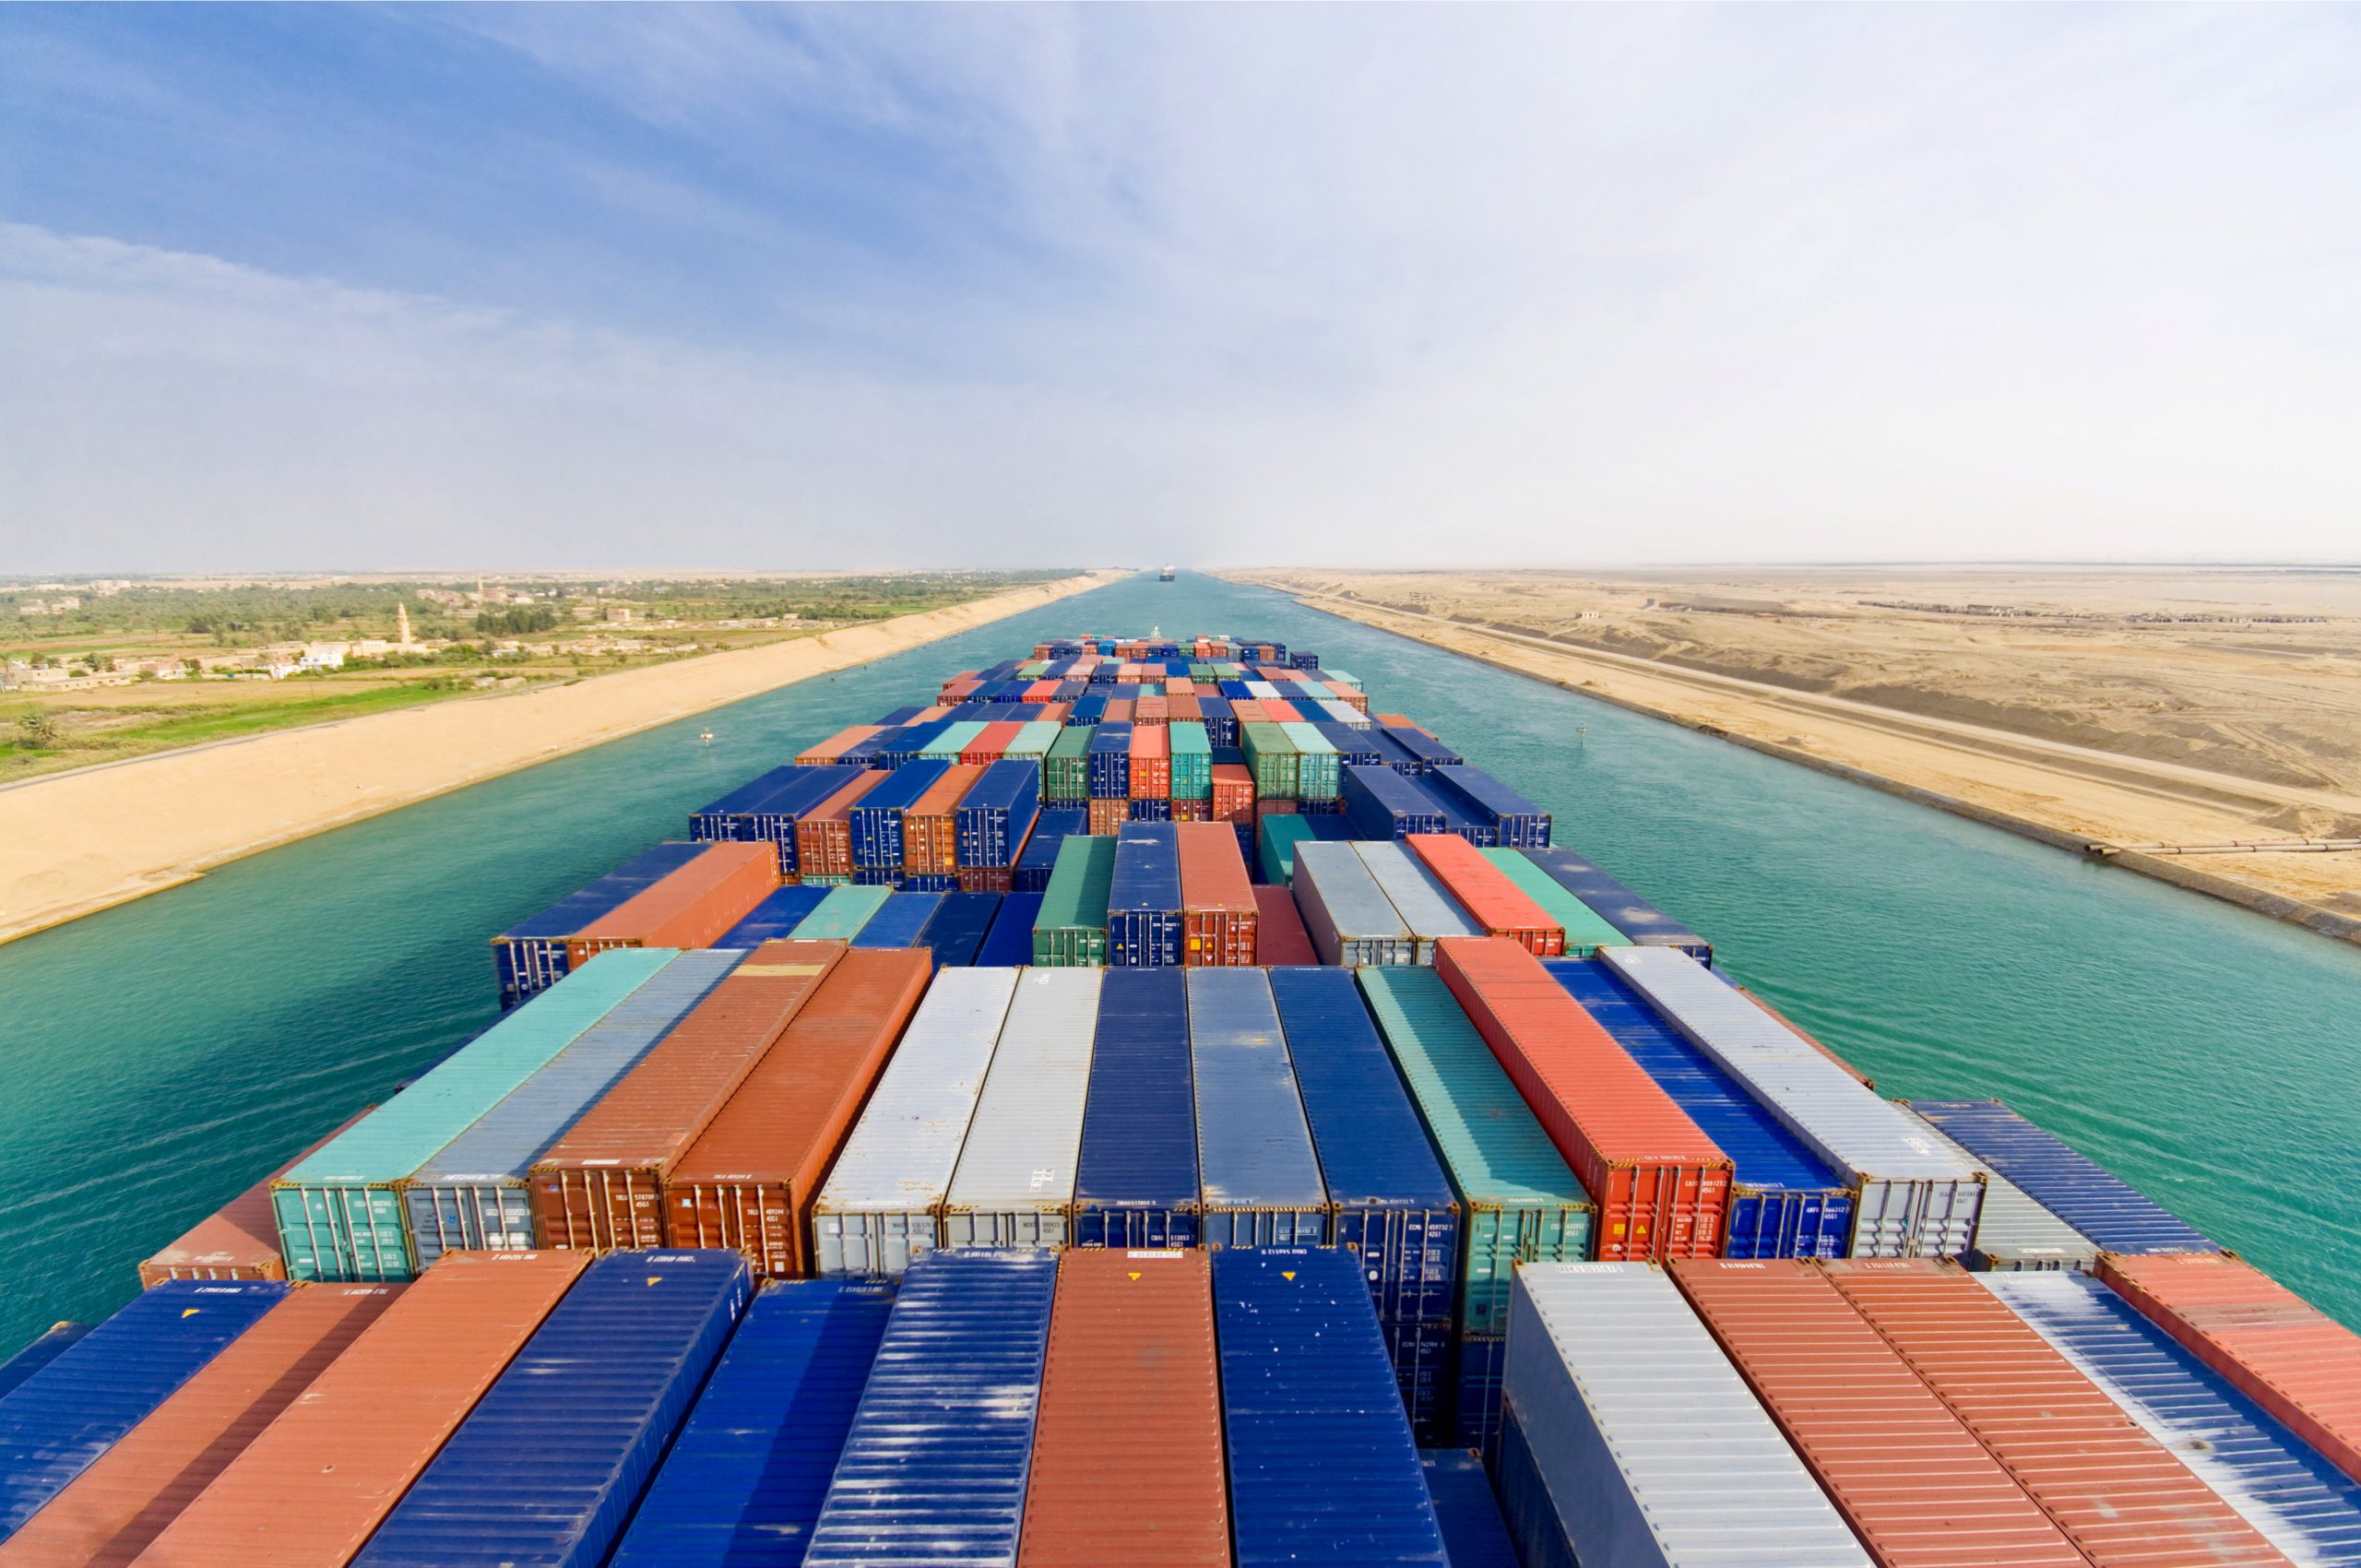 Containers on a ship in the Suez canal